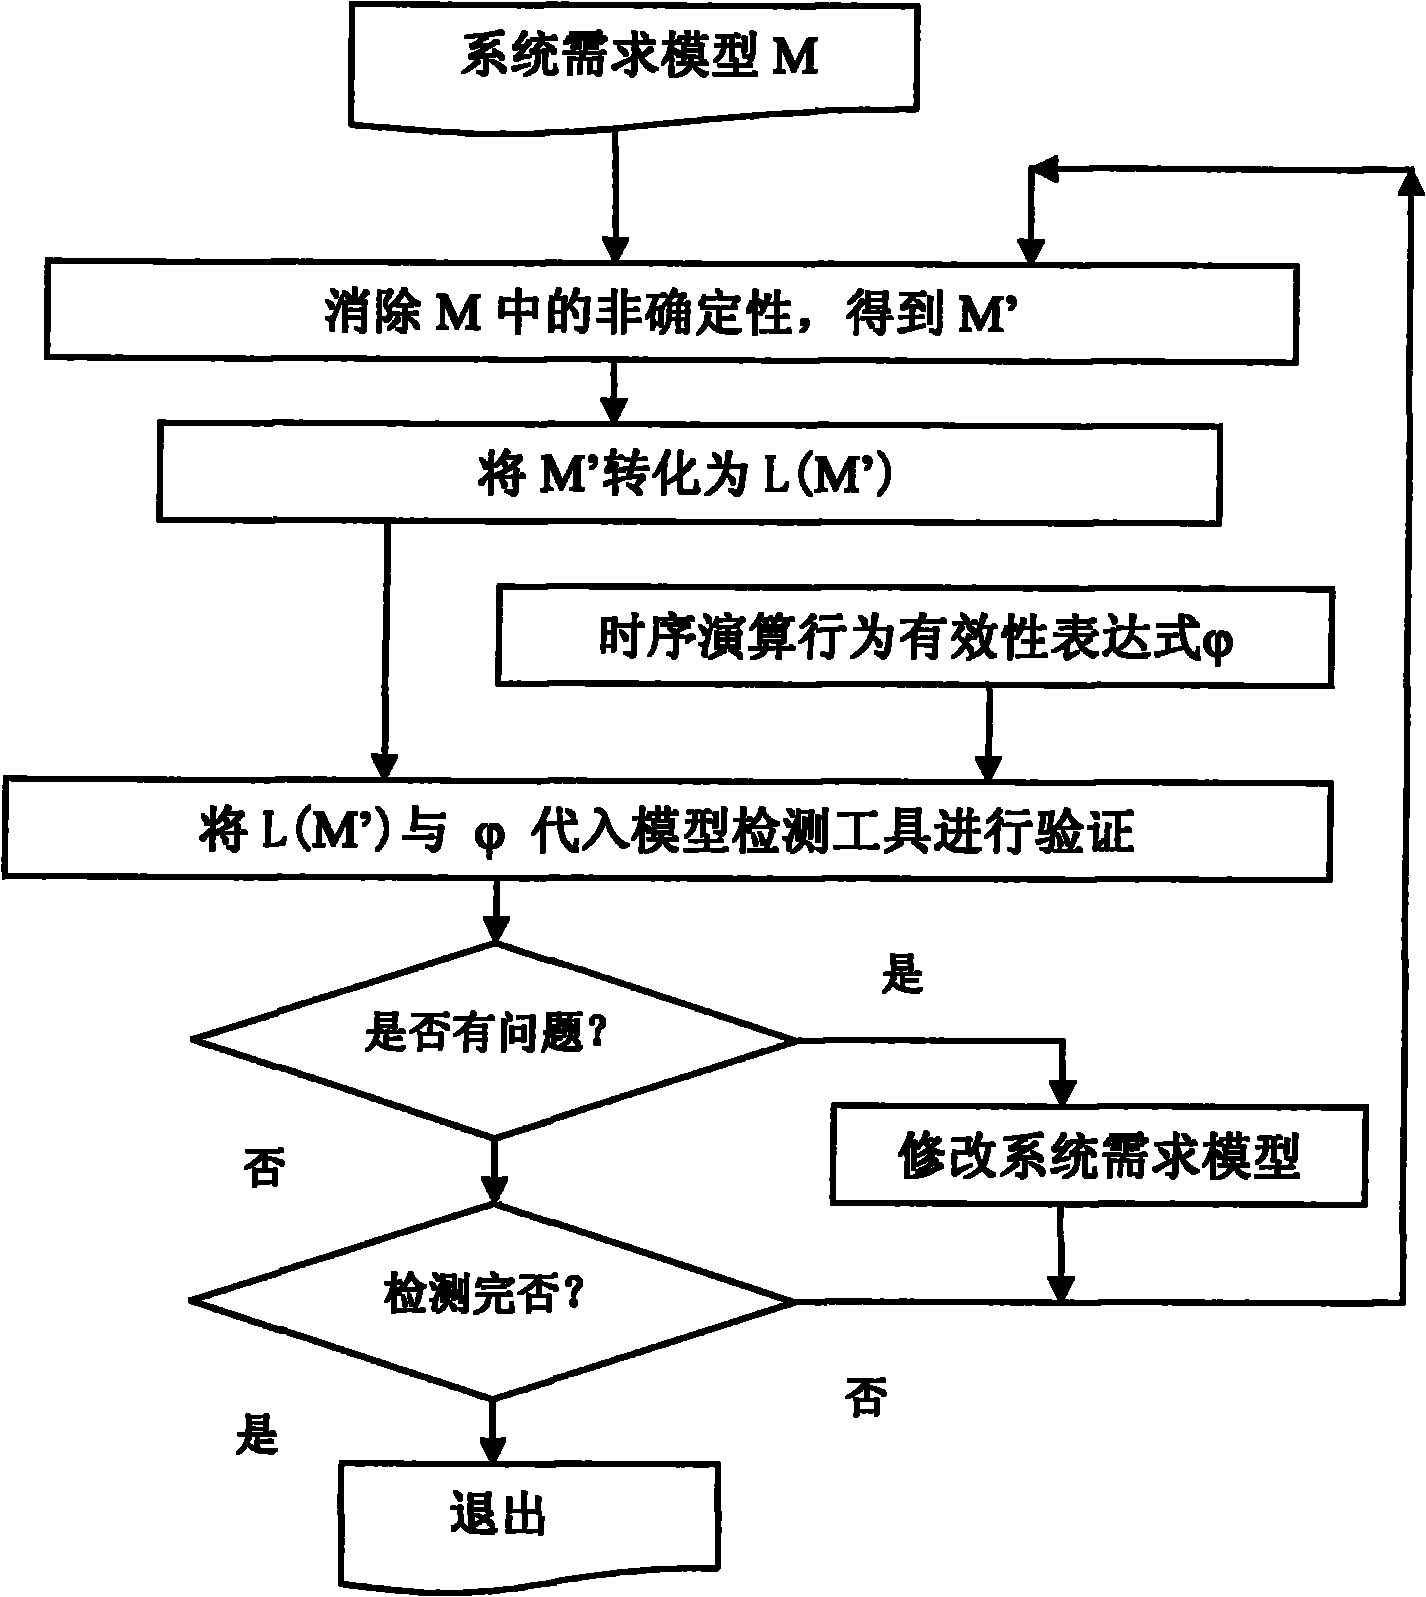 Method for detecting software features on basis of system requirement model